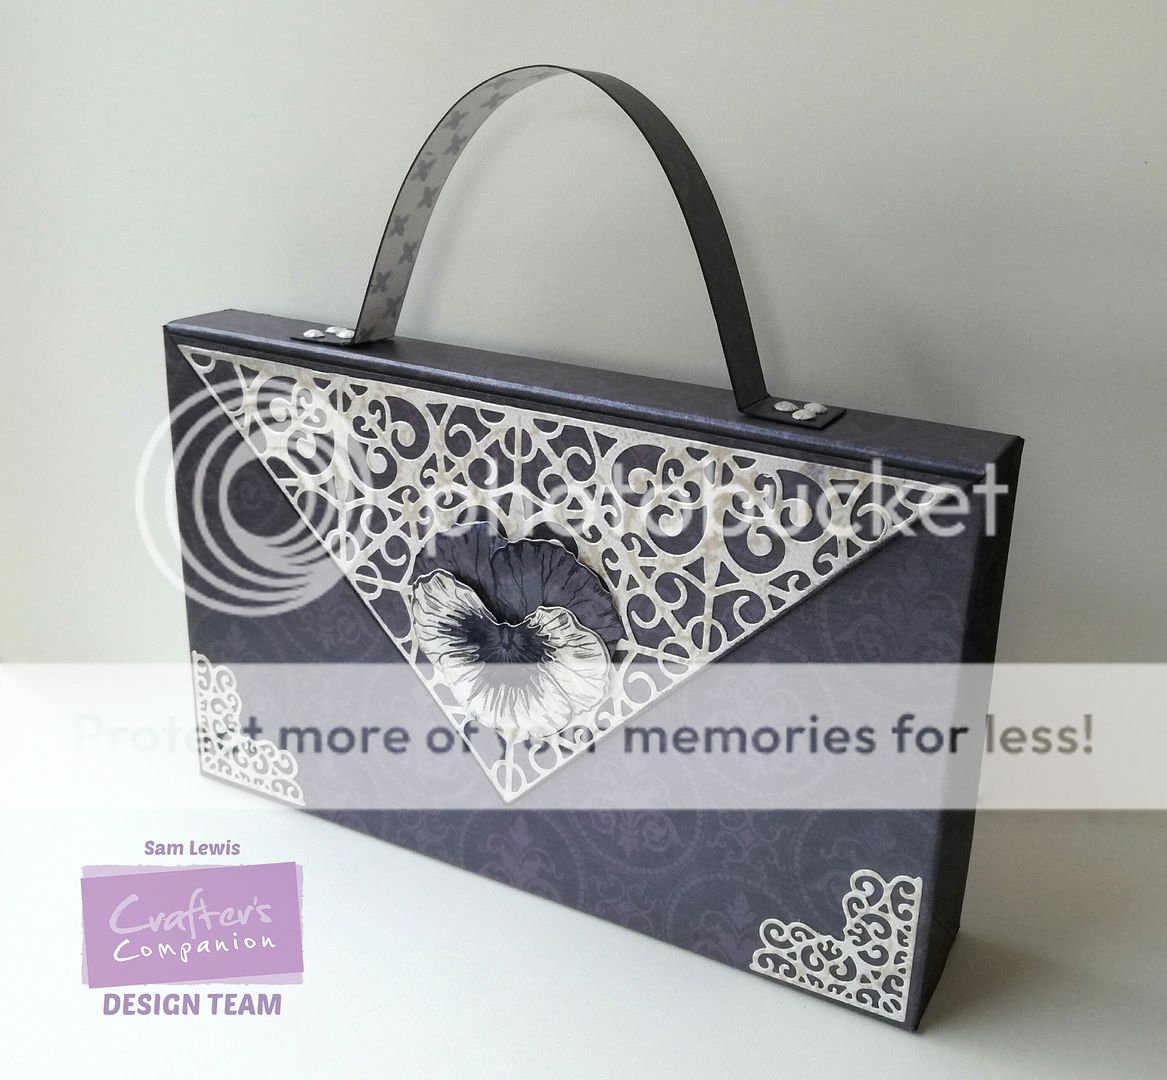 Papercrafted Handbag by Sam Lewis, featuring Crafter's Companion Downton Abbey Card and Dies.